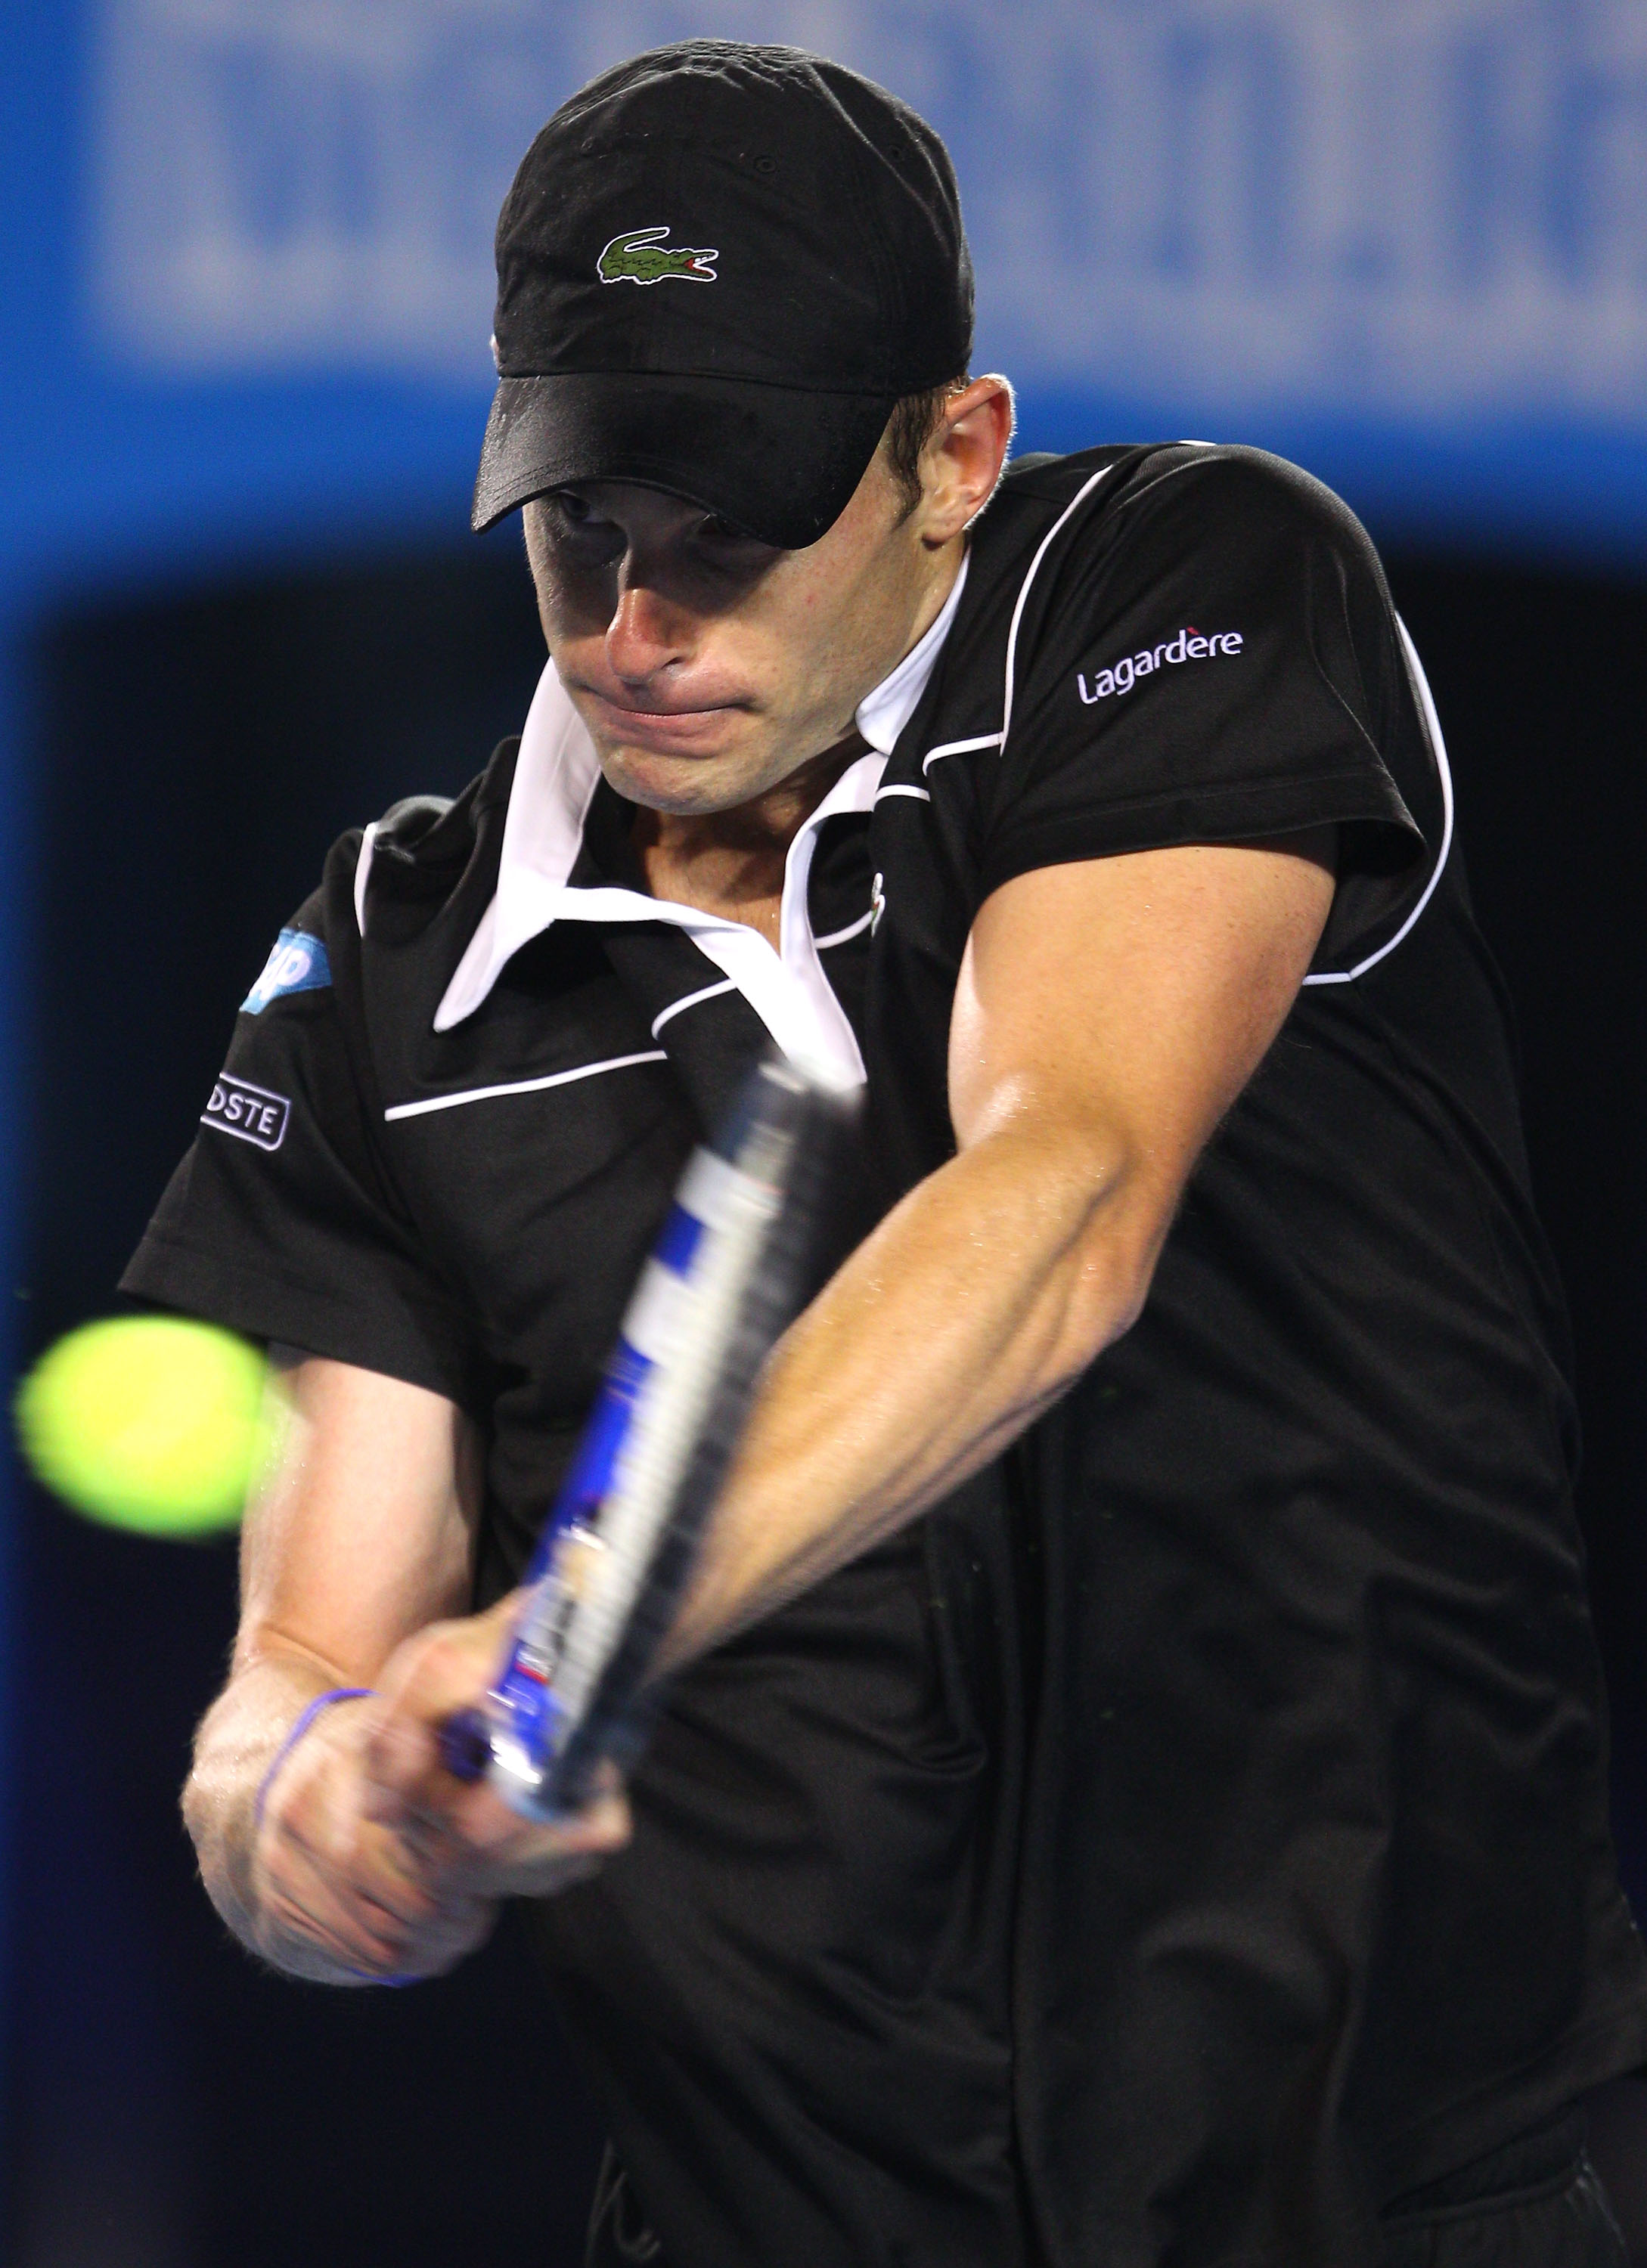 MELBOURNE, AUSTRALIA - JANUARY 23:  Andy Roddick of the United States of America plays a backhand in his fourth round match against Stanislas Wawrinka of Switzerland during day seven of the 2011 Australian Open at Melbourne Park on January 23, 2011 in Mel